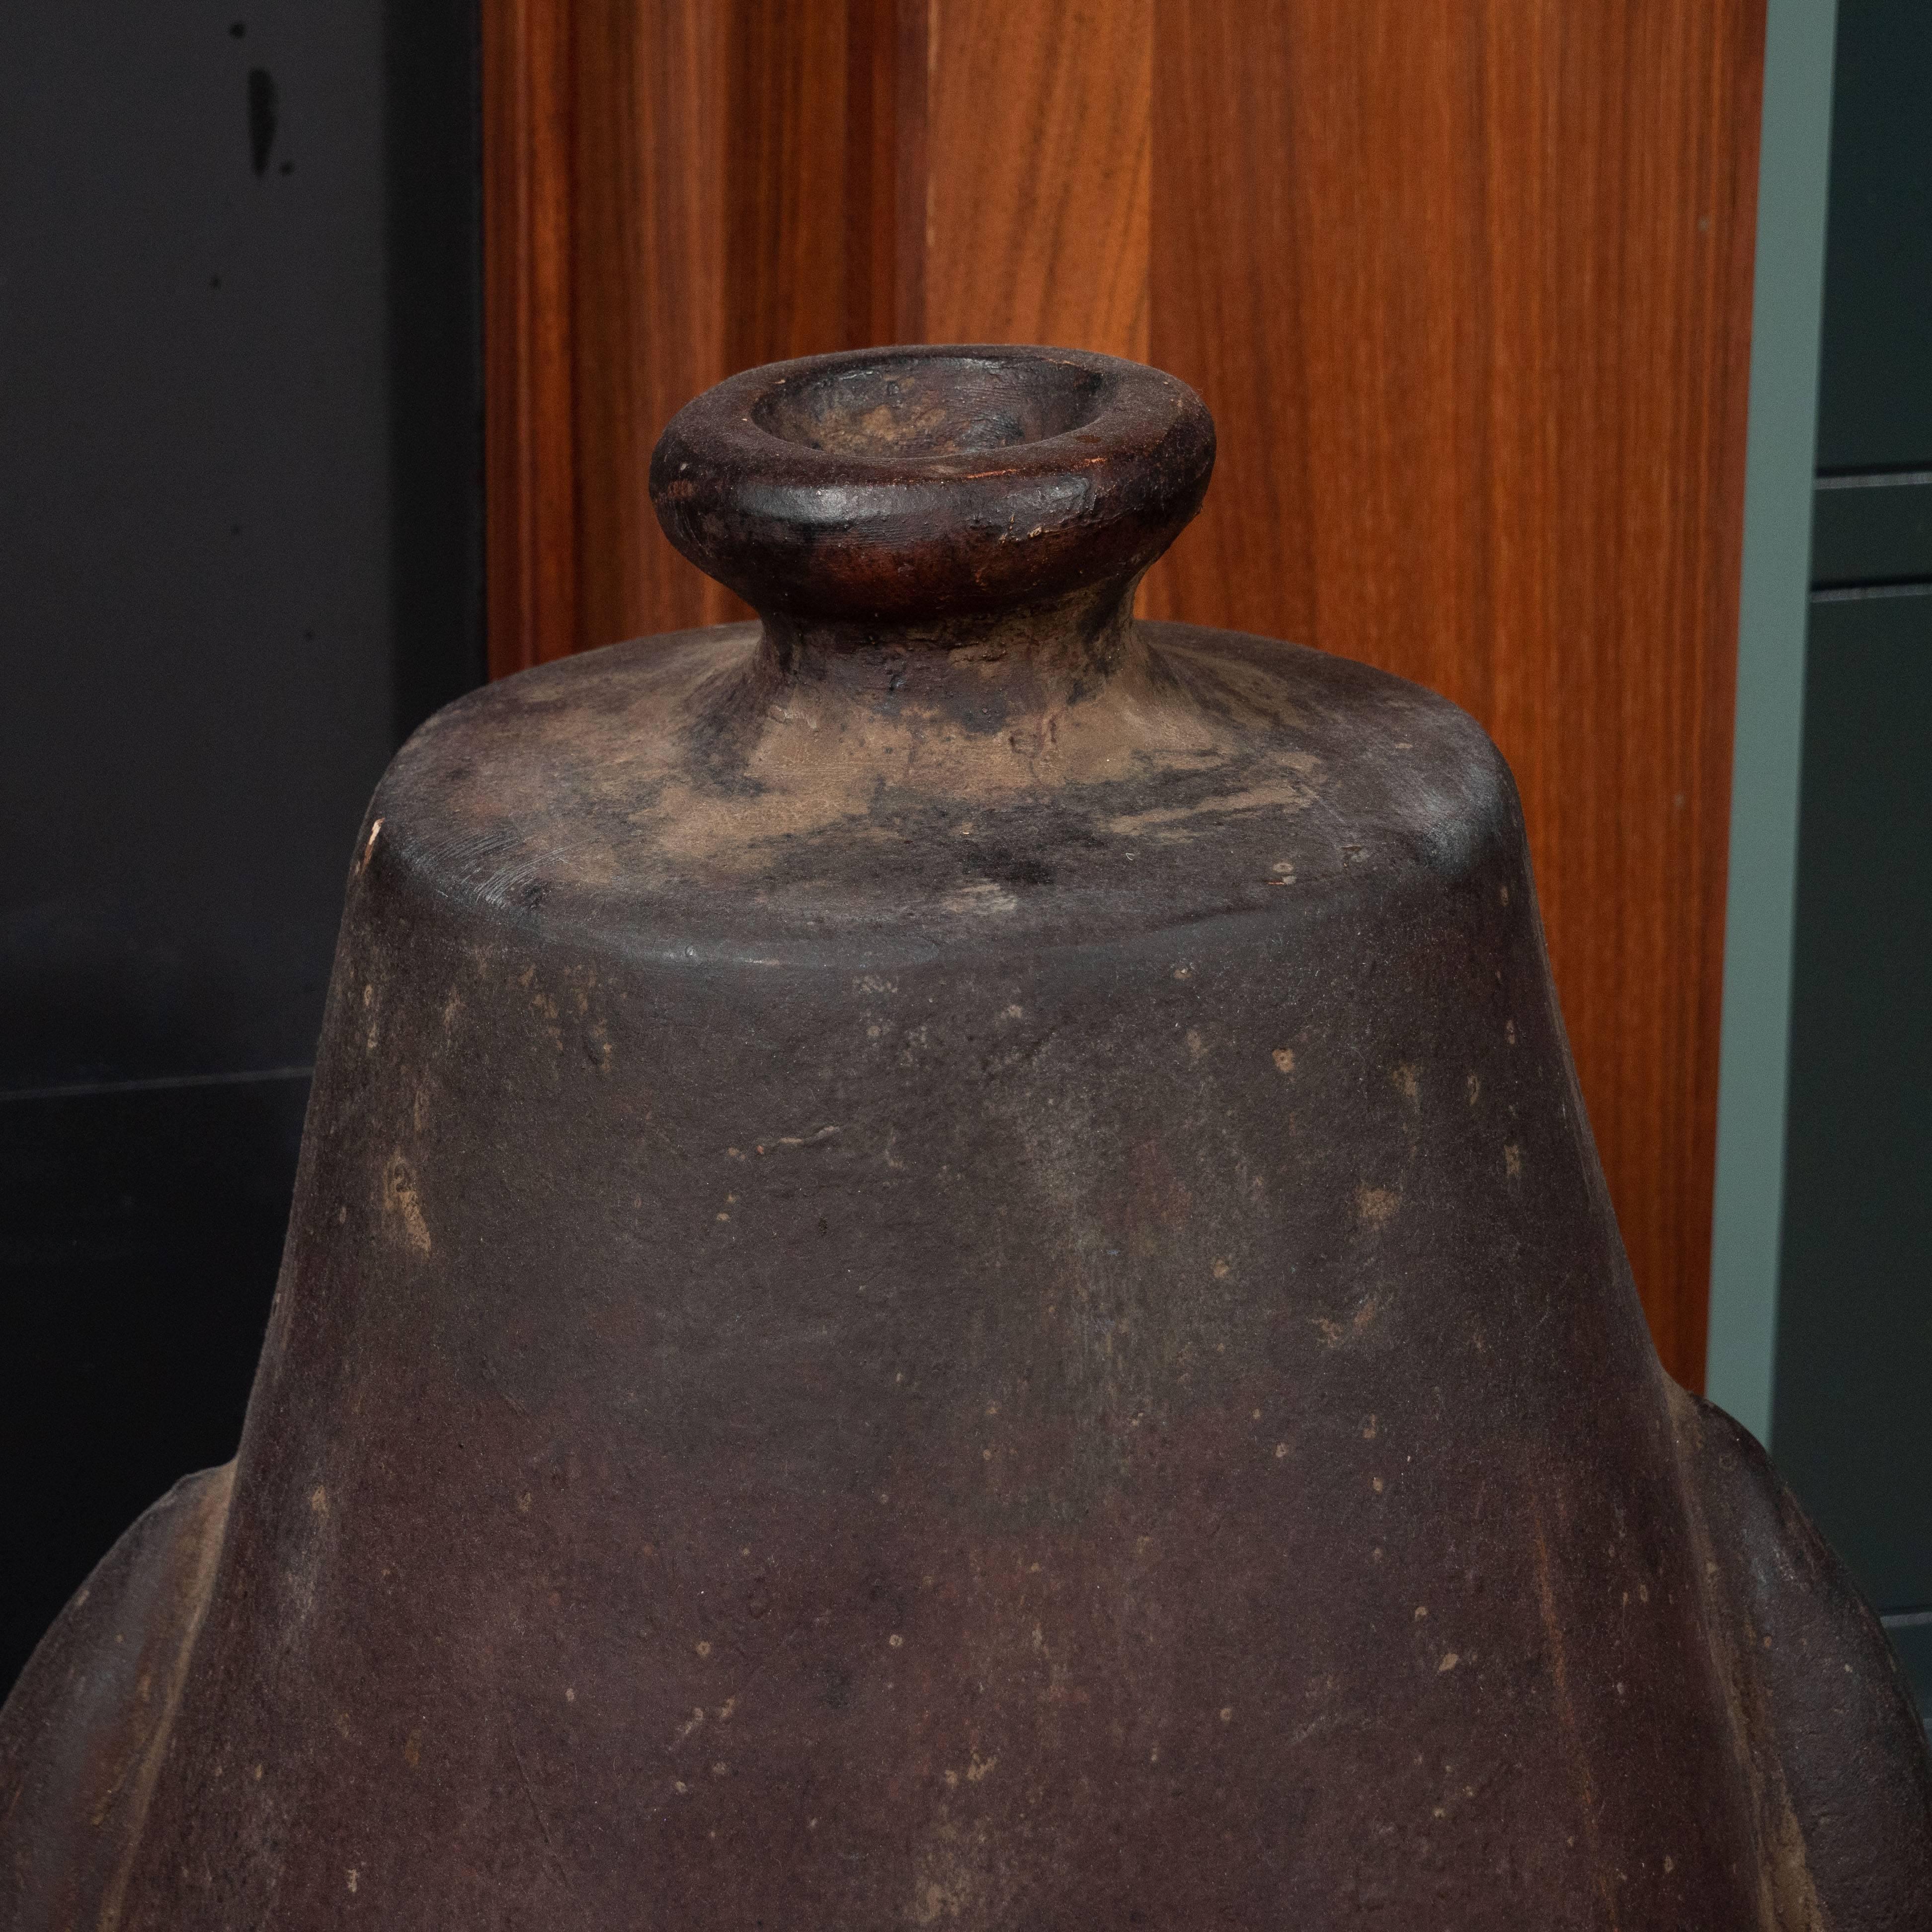 Large African storage vessel, probably late 19th century.

Width at top is 7.5